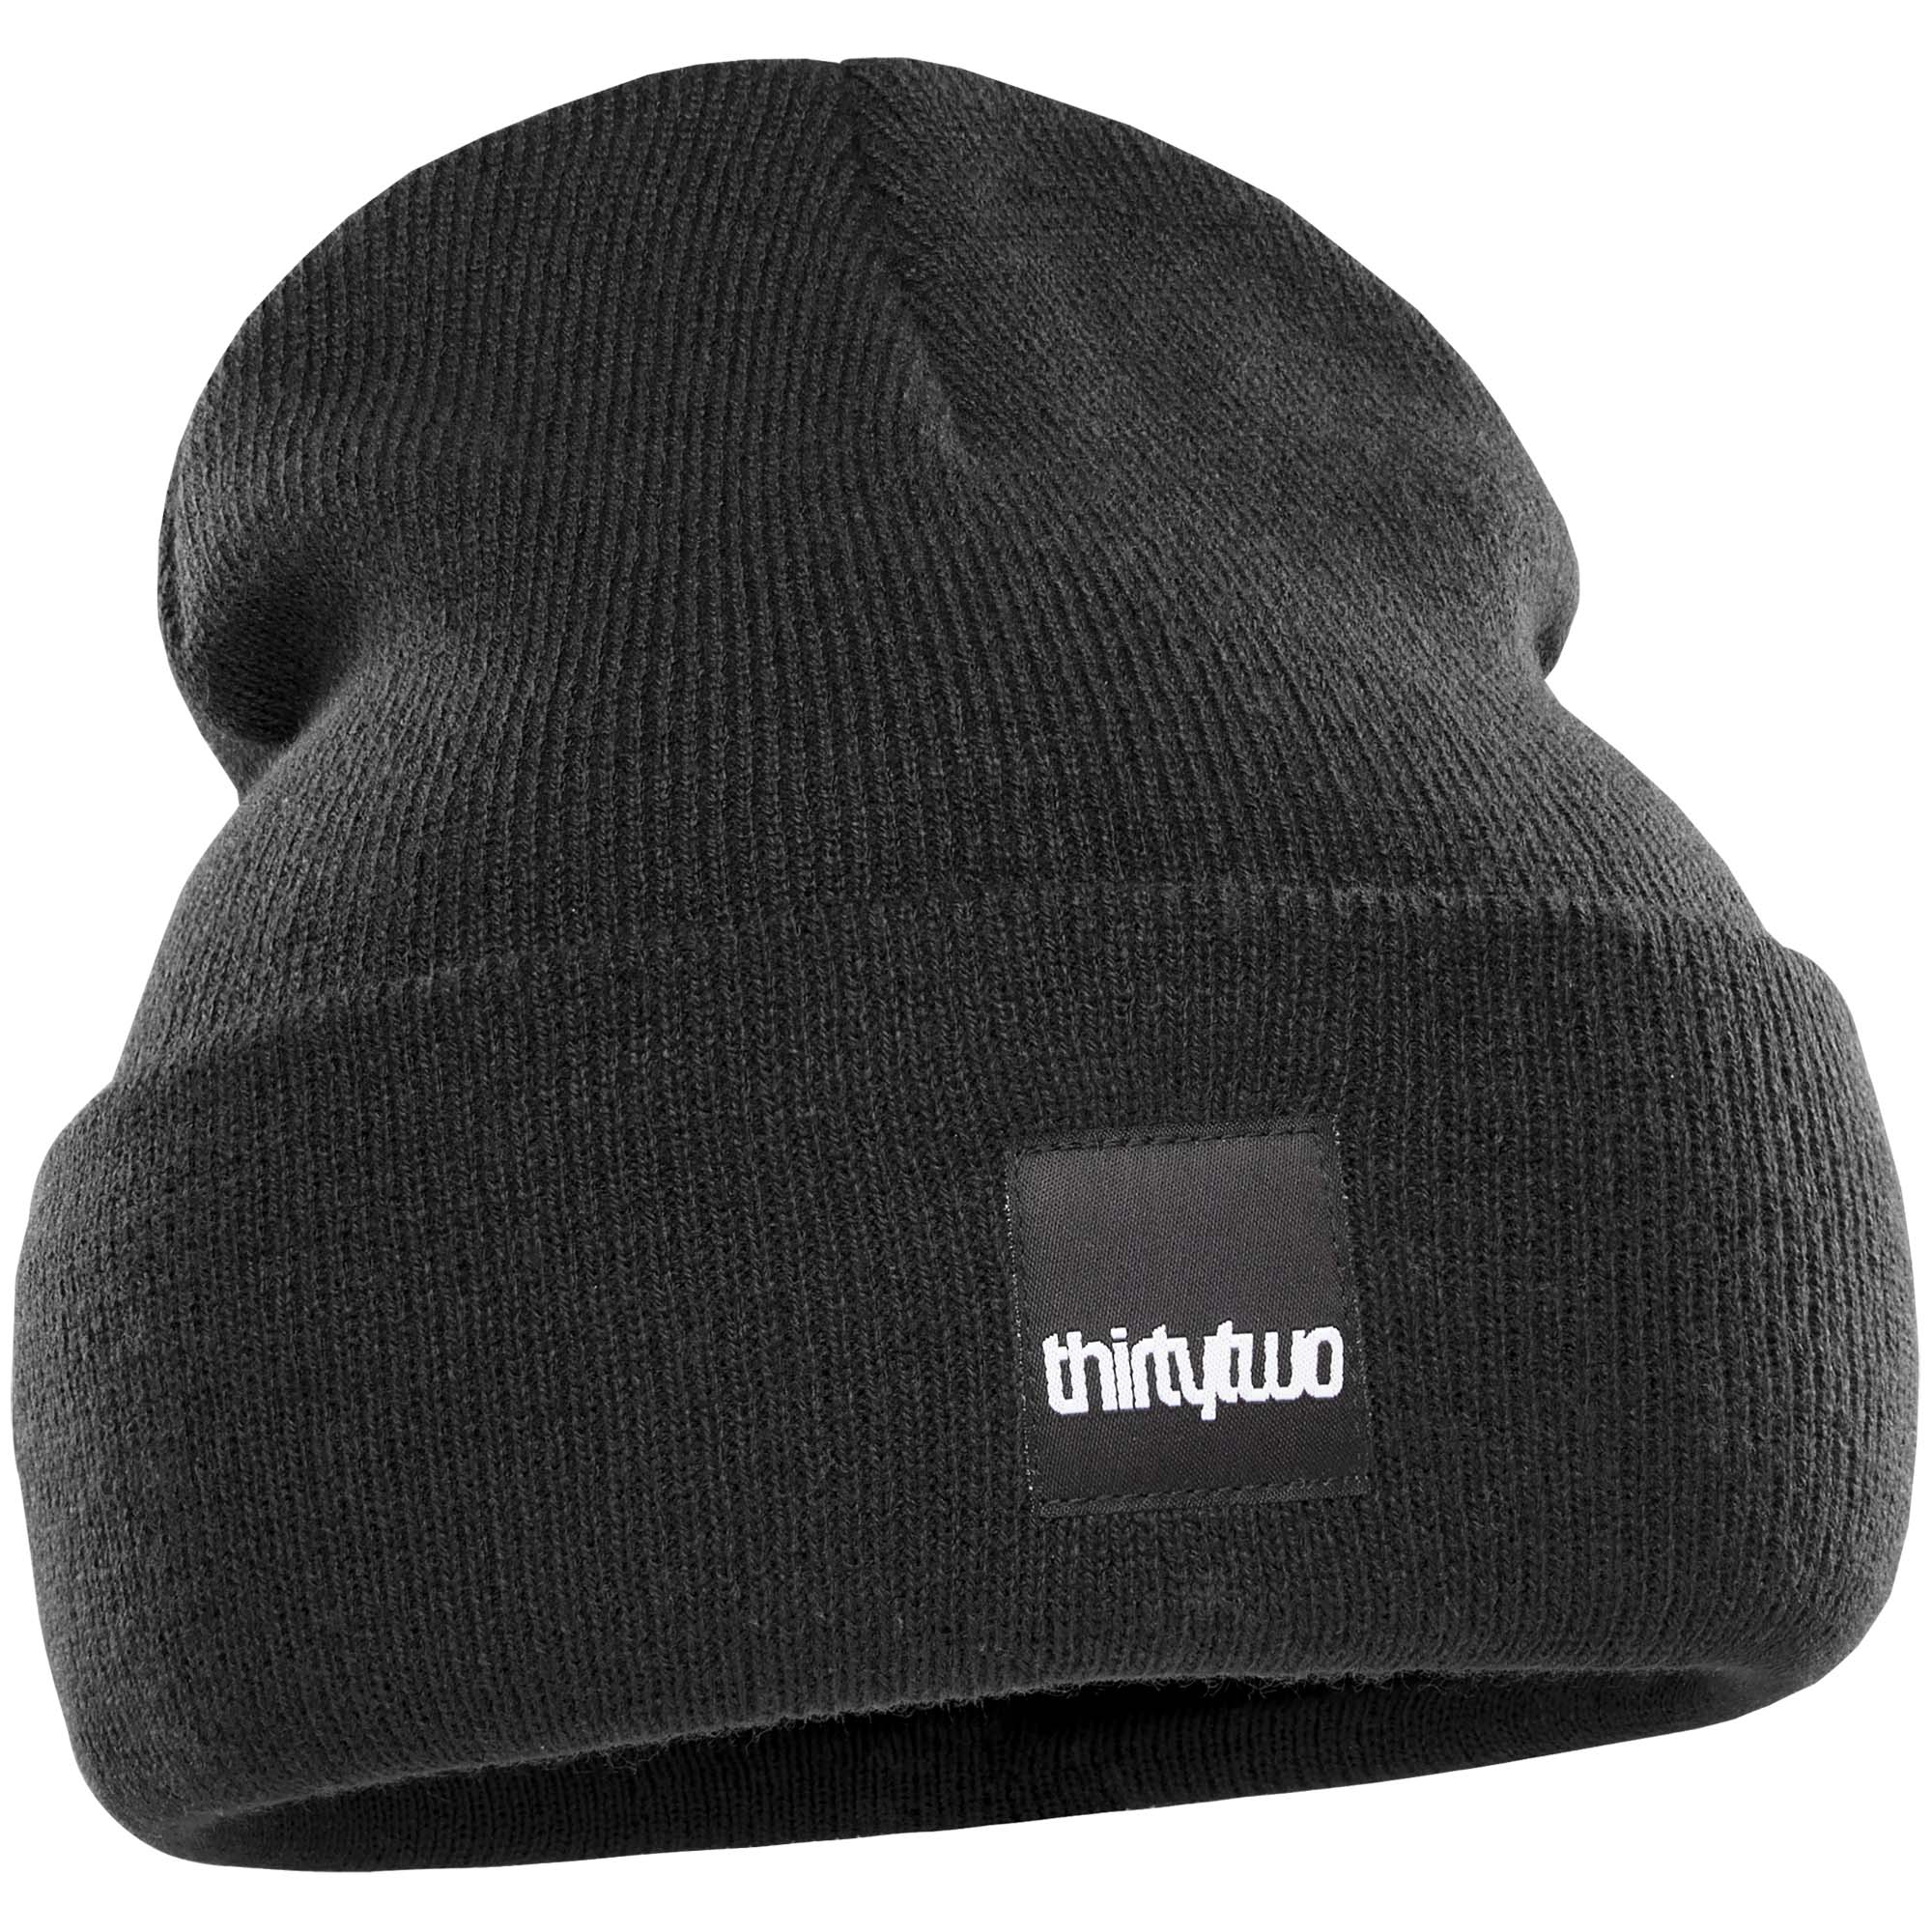 thirtytwo Patch Extended Ski/Snowboard Beanie